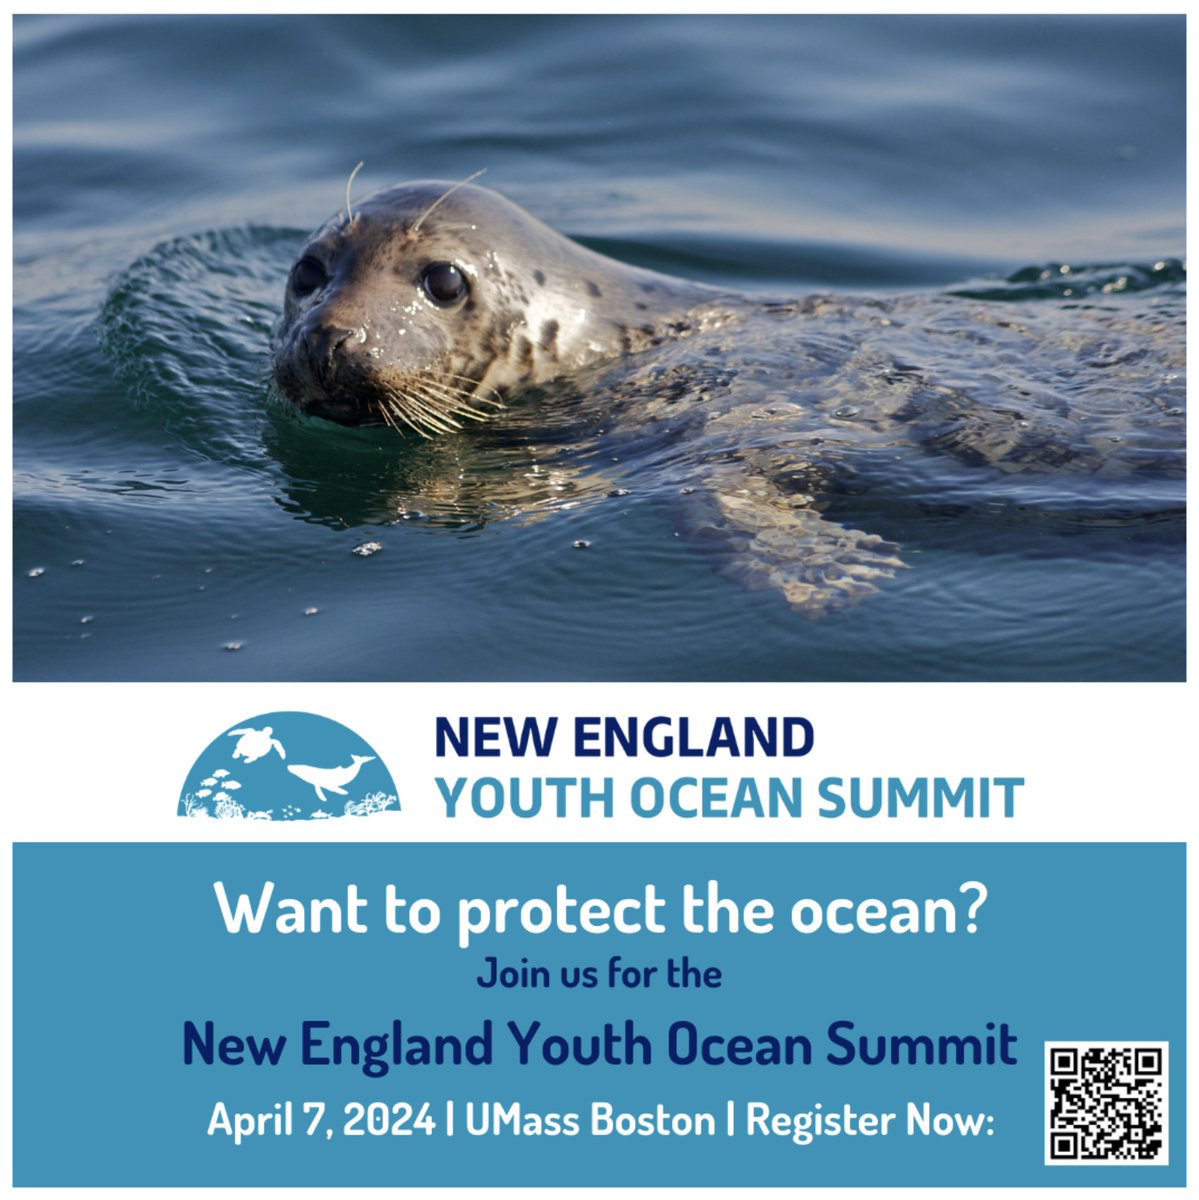 Passionate about protecting marine environments? Attend the New England Youth Ocean Summit! 🦭 Any students interested in either attending or helping to organize events should check out the link below! youthoceansummit.org